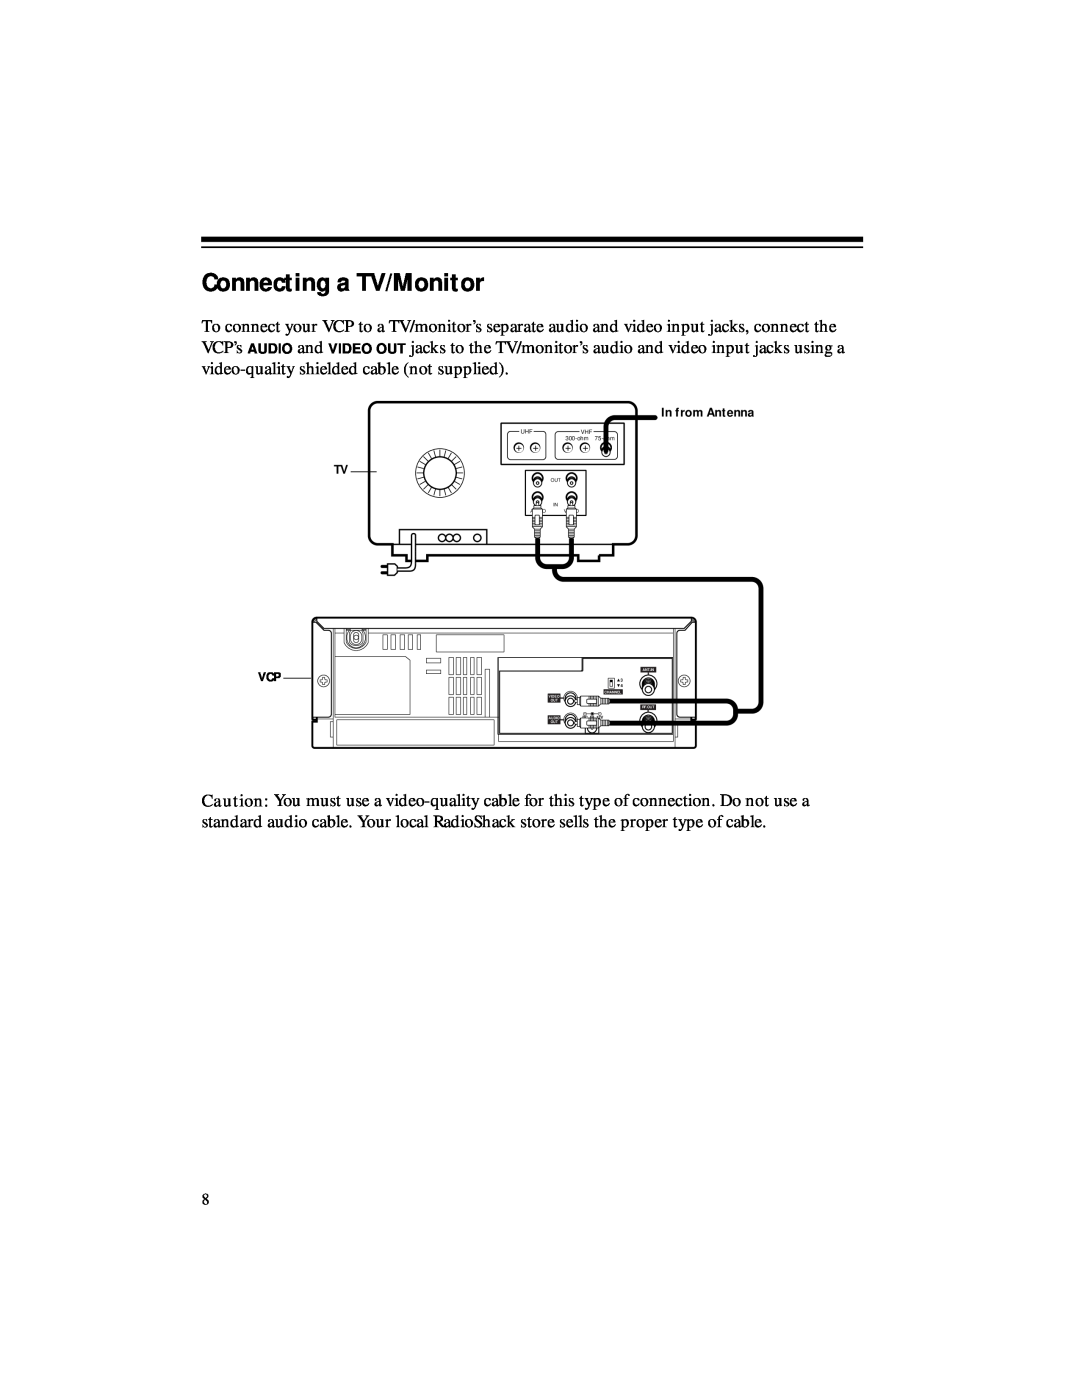 RCA 50, 40 owner manual Connecting a TV/Monitor, In from Antenna 